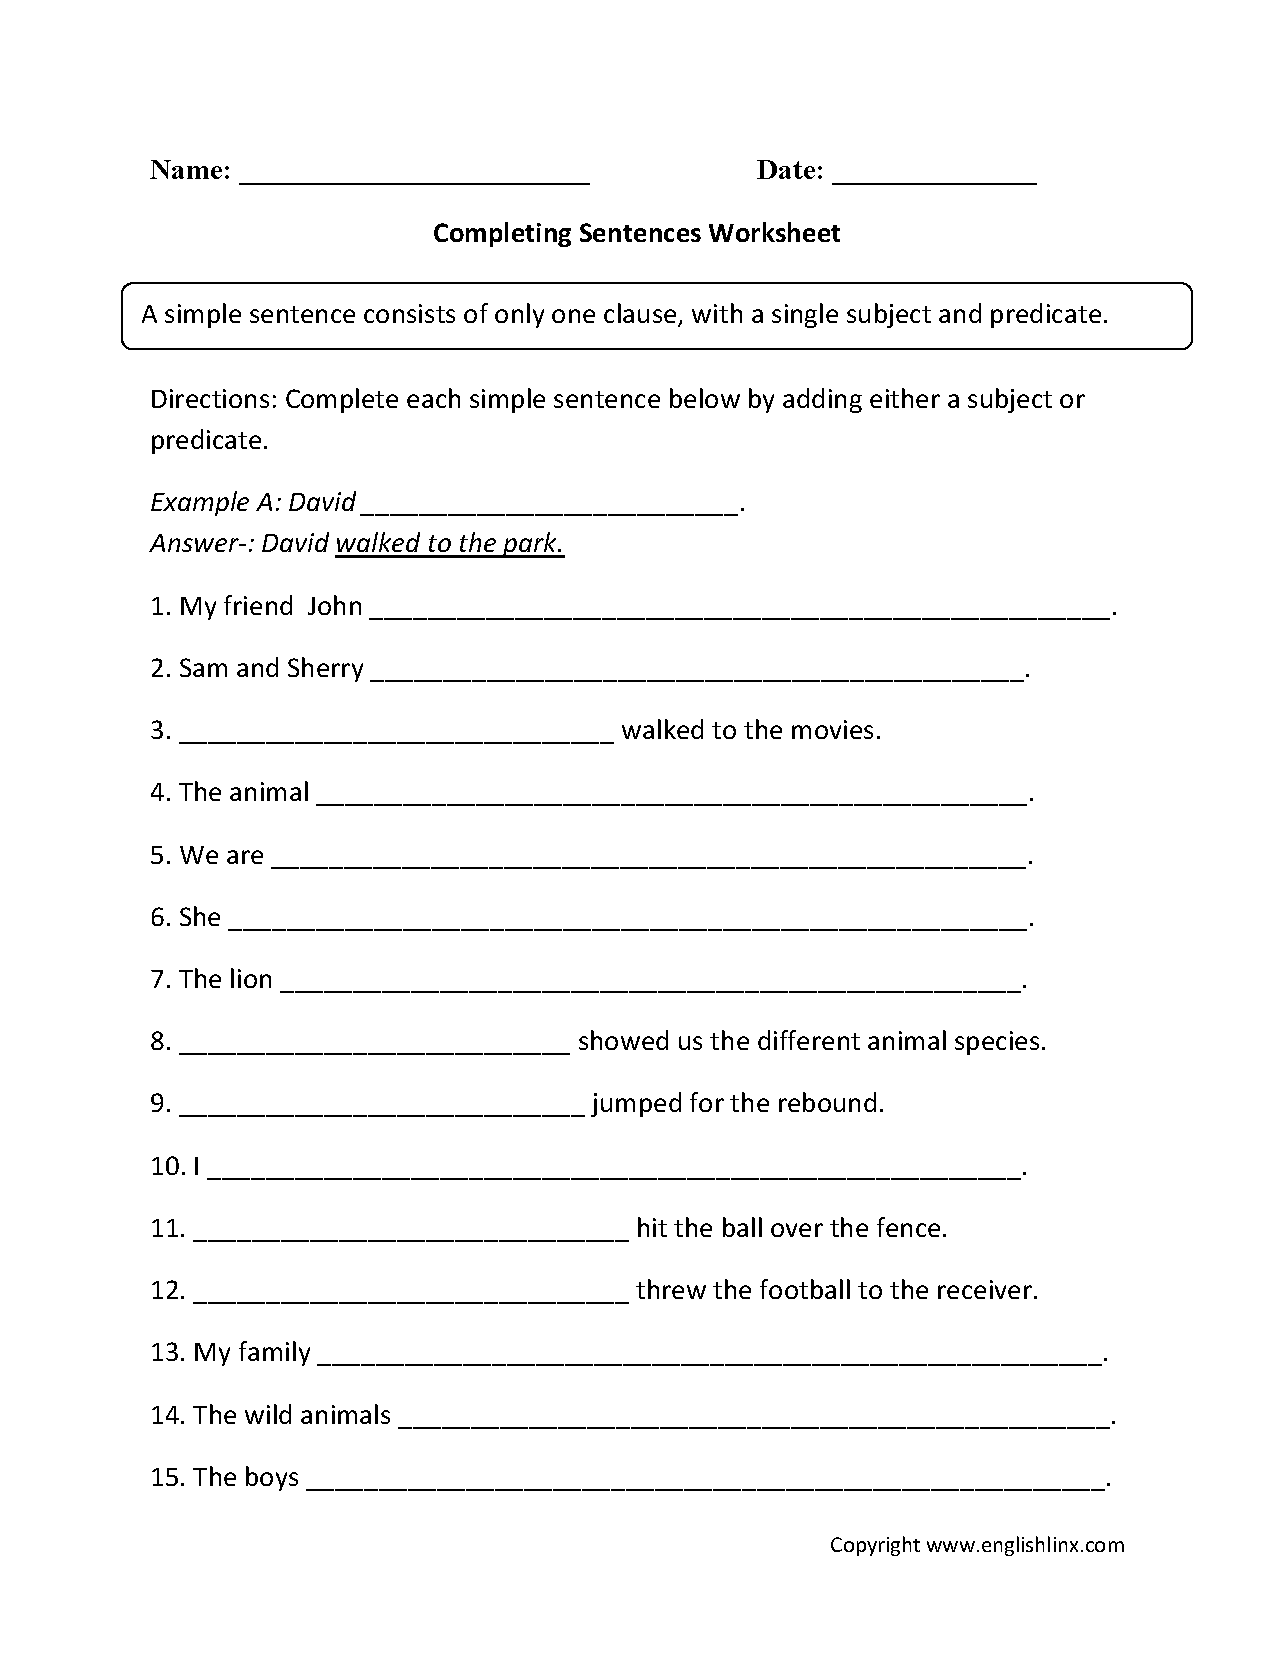 16-best-images-of-types-of-writing-worksheet-different-types-of-writing-worksheets-2nd-grade